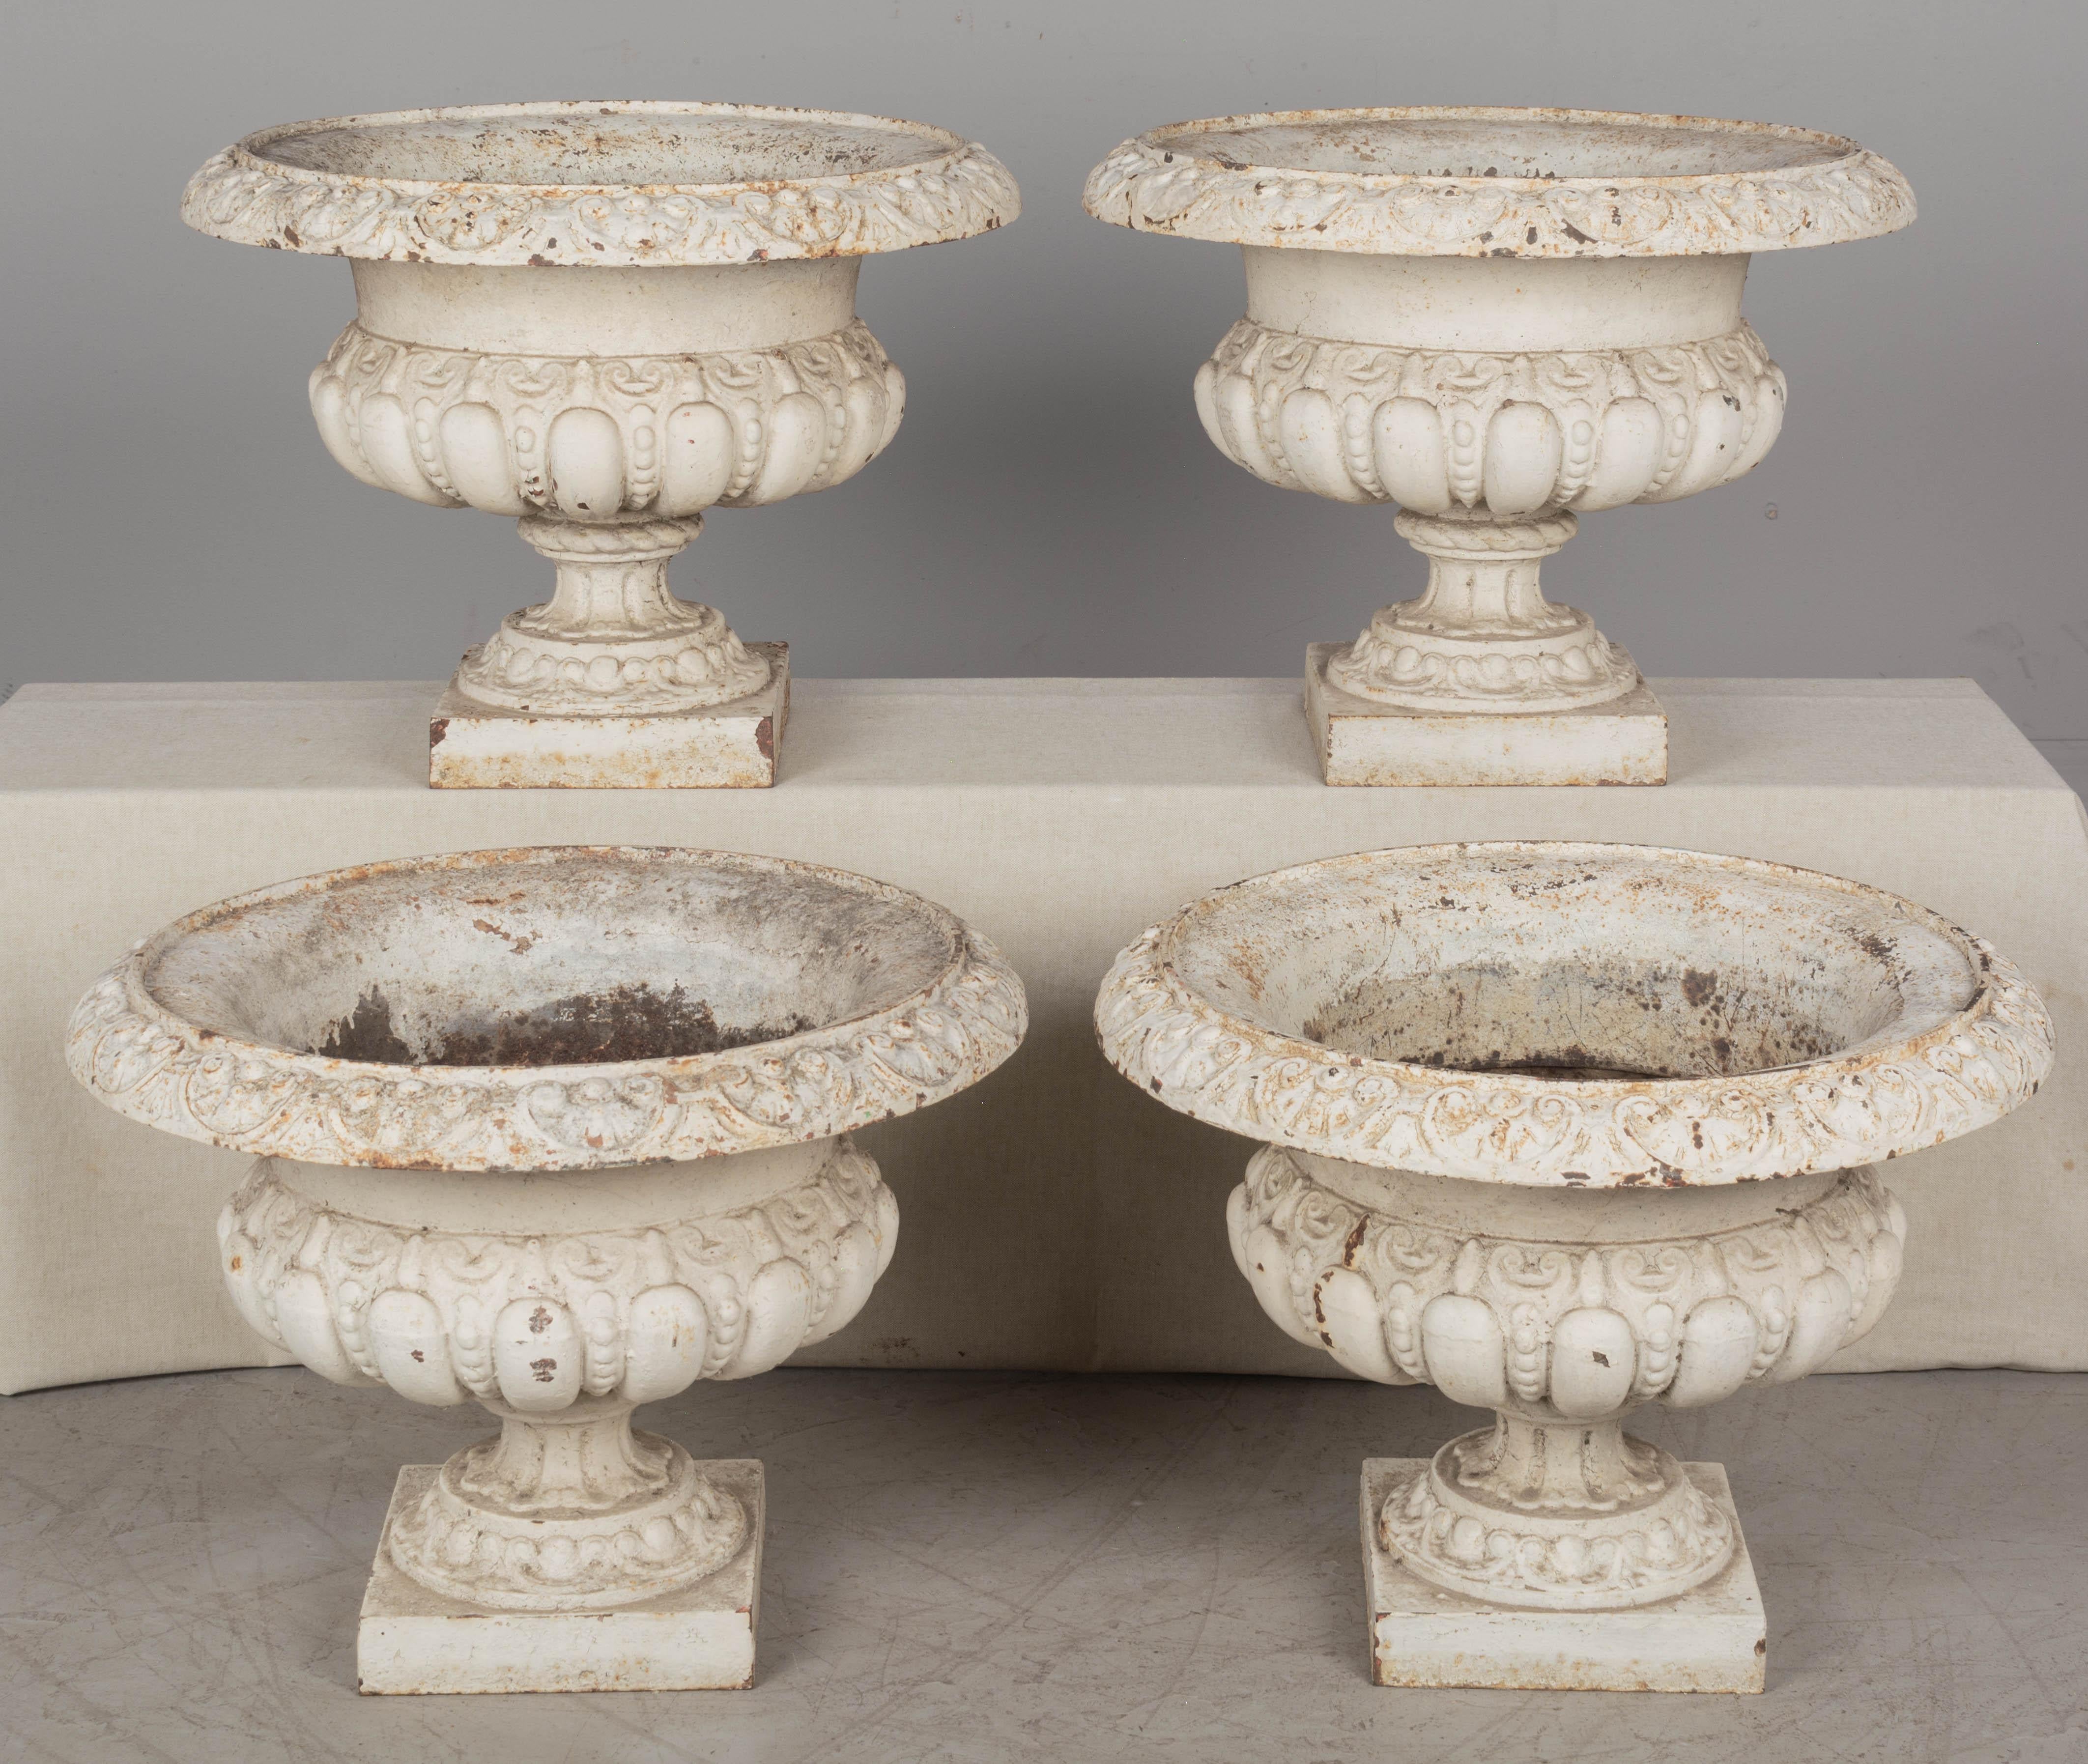 A set of four 19th century French cast iron white painted garden urn planters. Original weathered rusty patina. One urn has a chip in the rim. Circa 1870-1880.
Weight: 54 Lbs each
Dimensions: 16